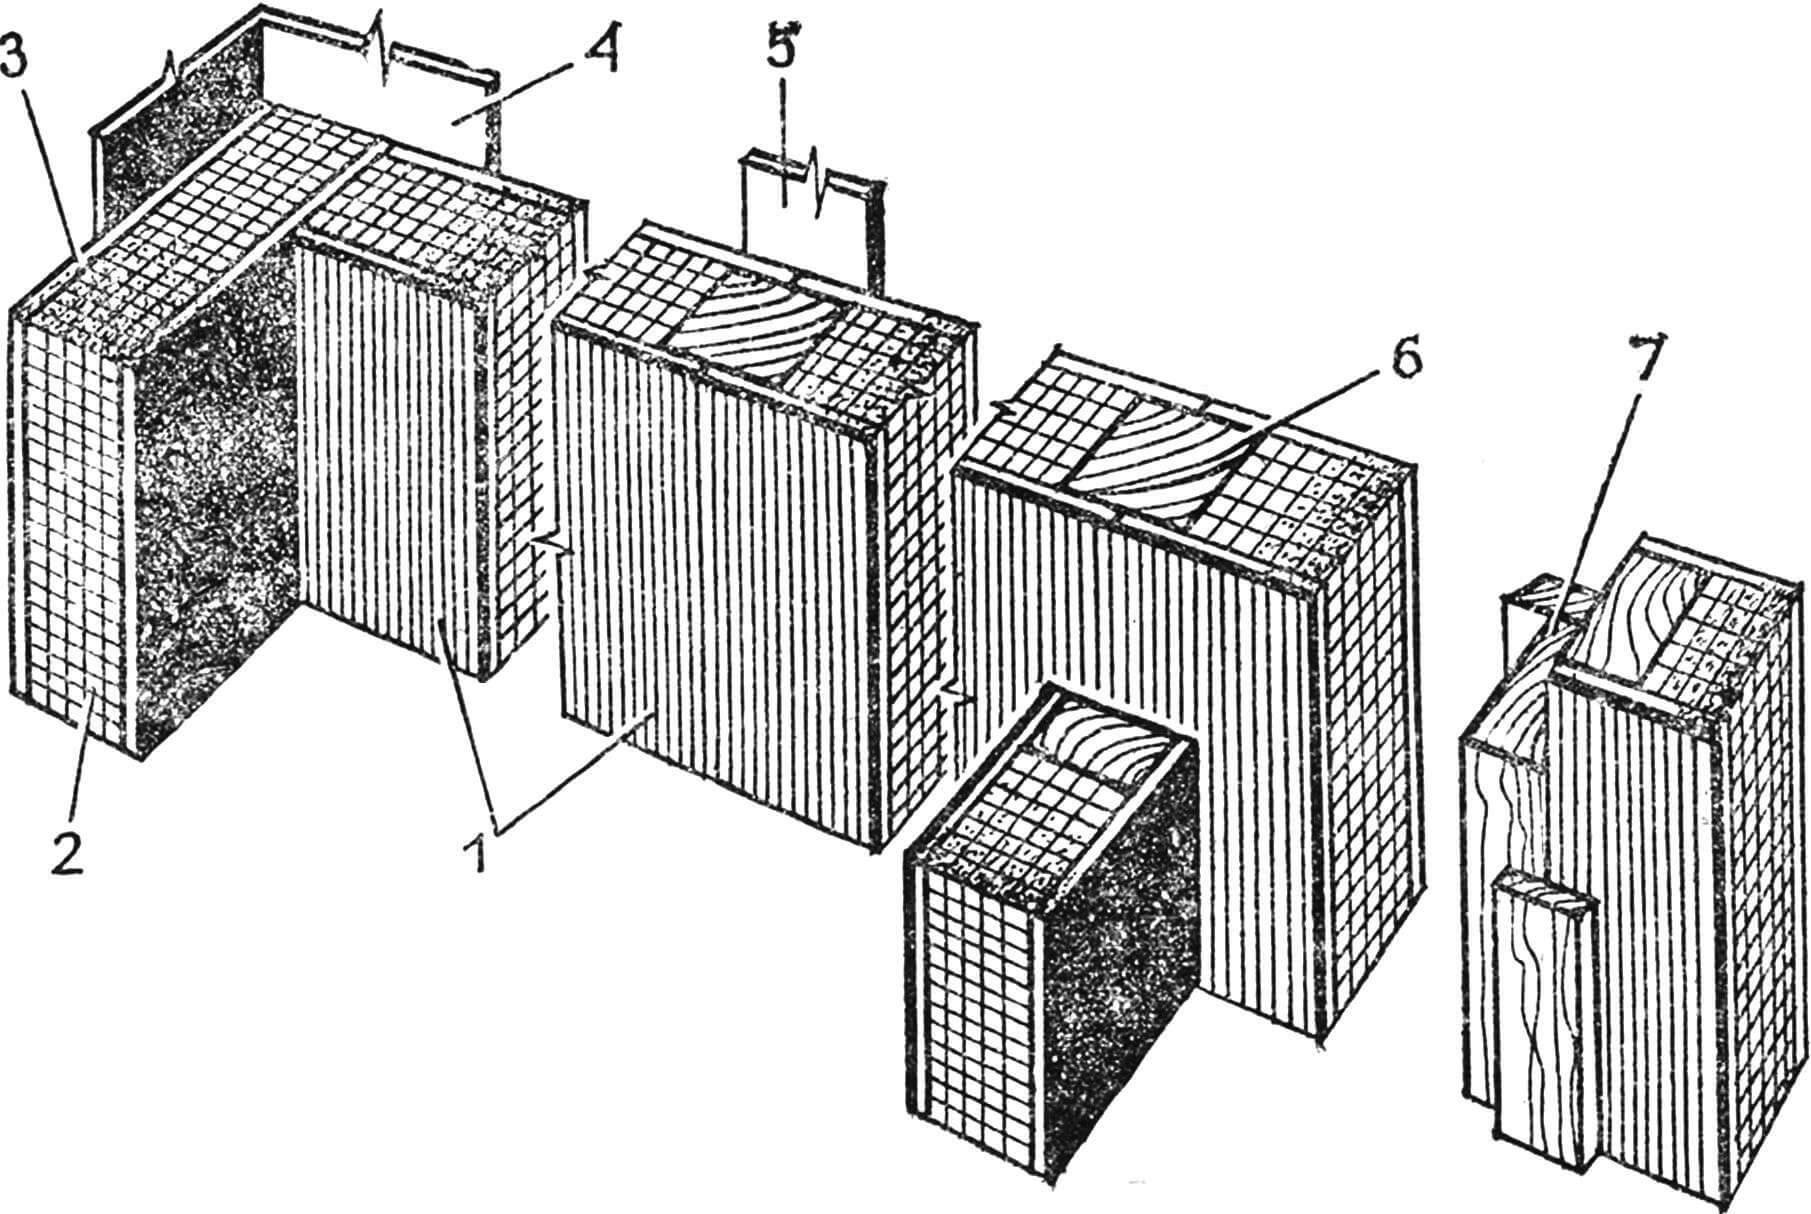 Fig. 3. Wall construction